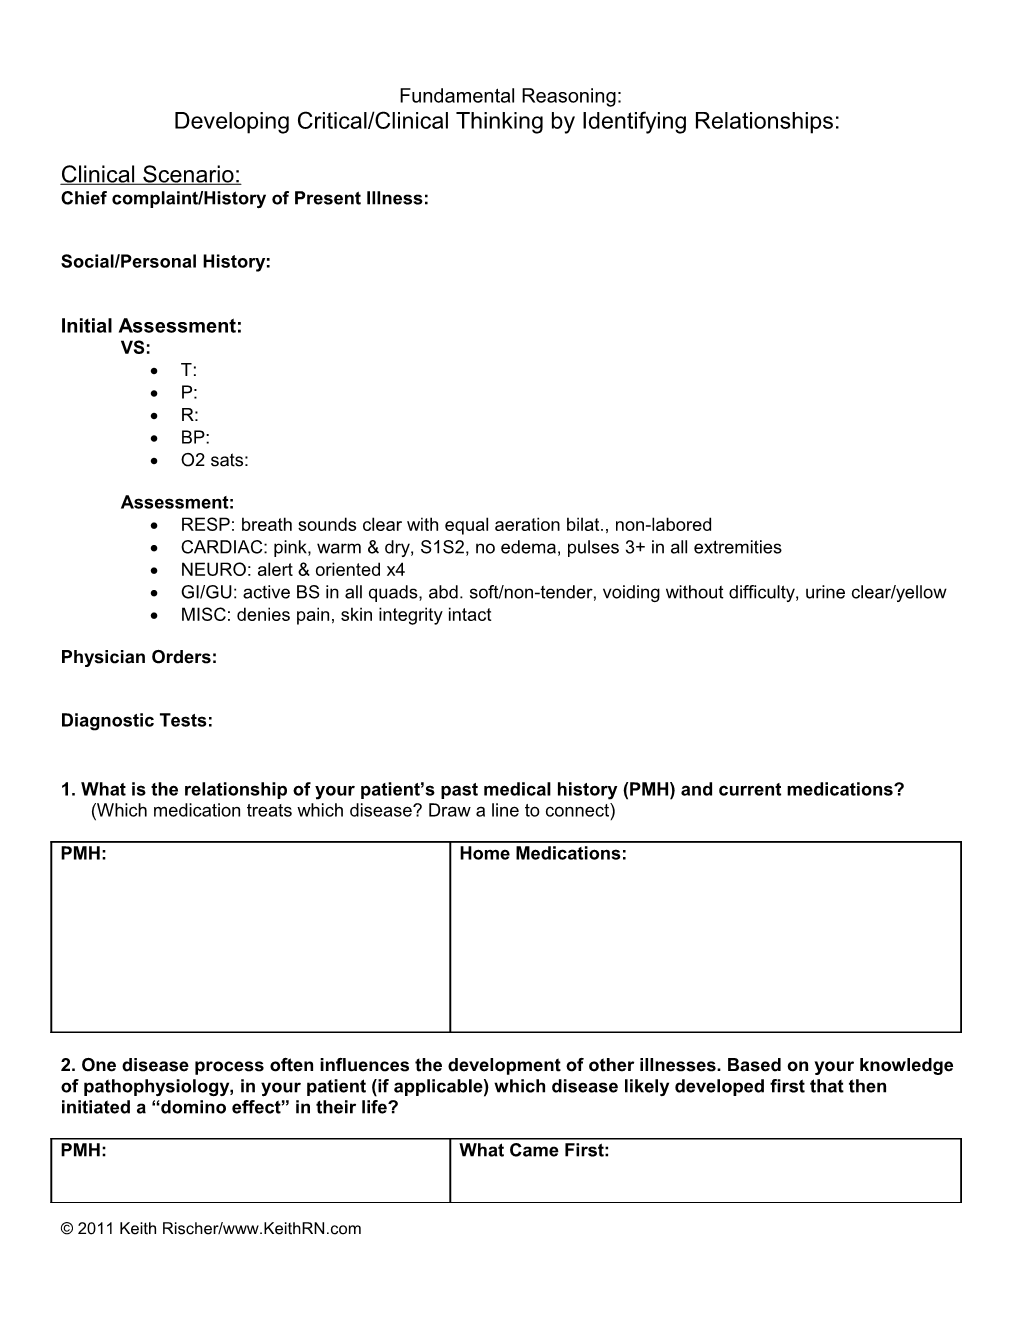 Template That Can Be Copied and Pasted to Develop Your Own Brief Clinical Application Exercises